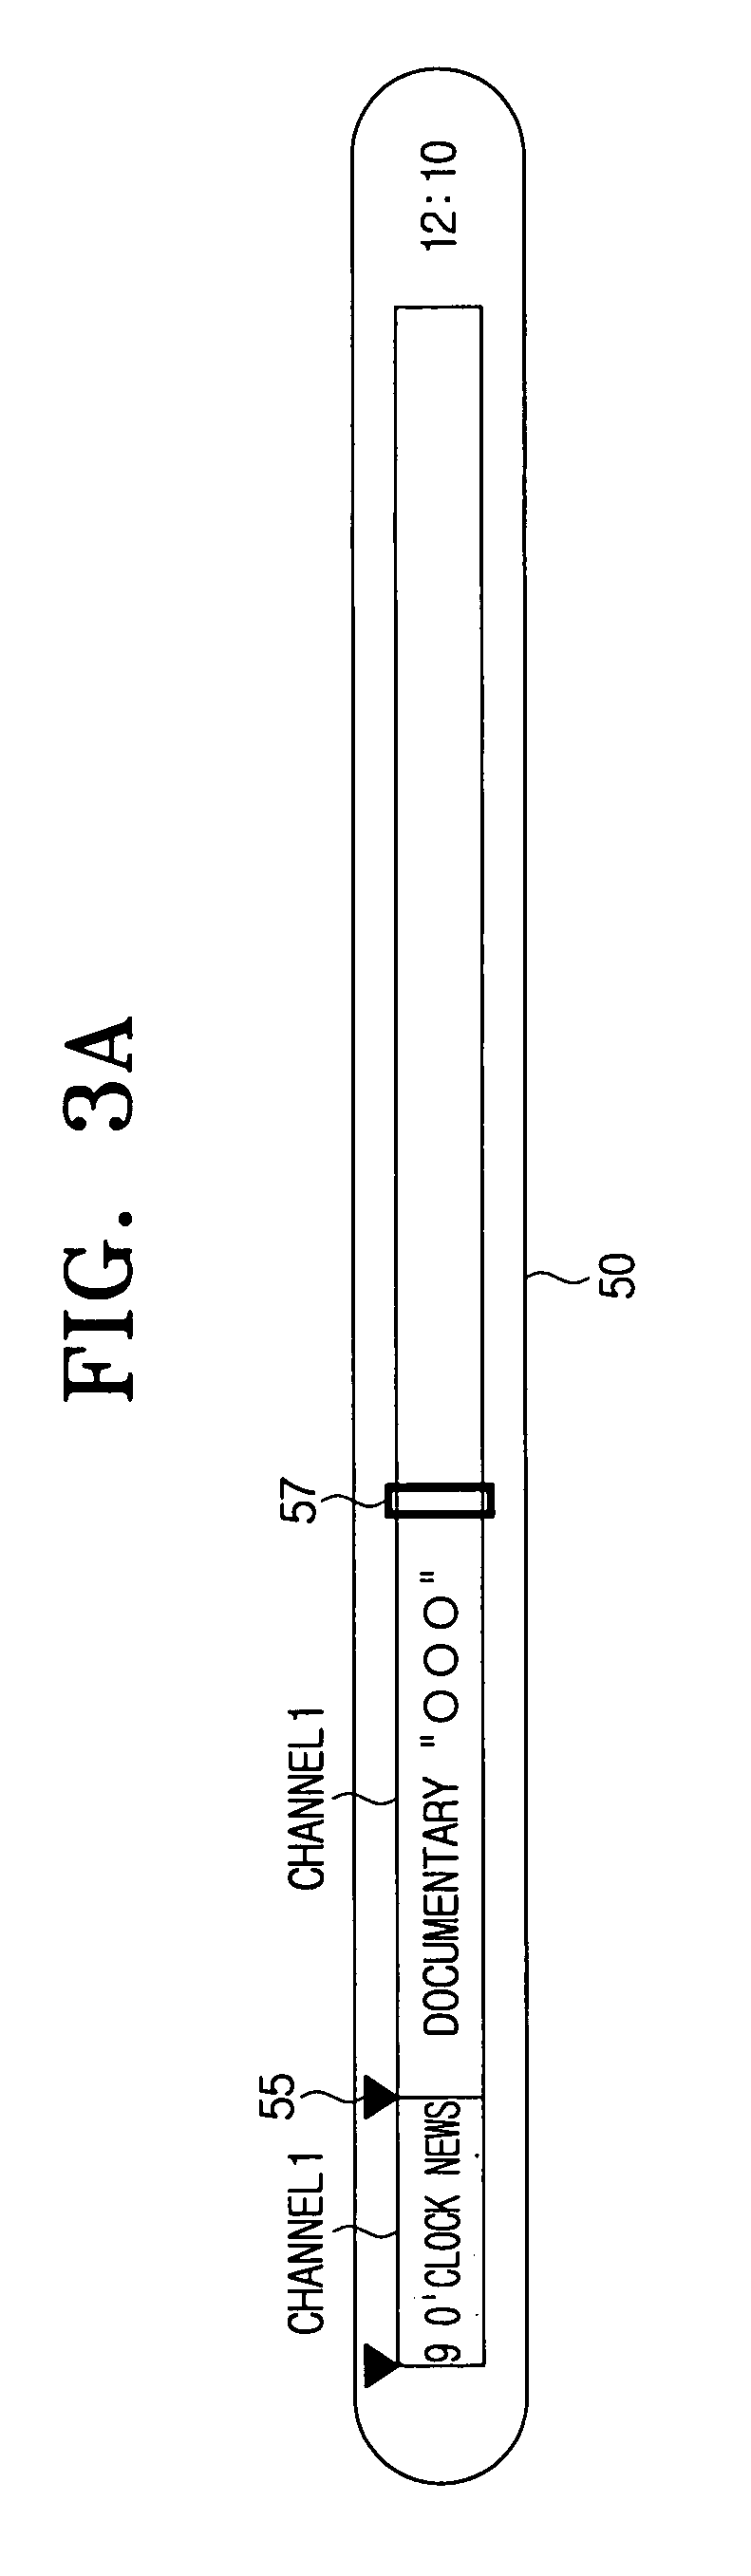 Video apparatus having bookmark function for searching programs and method for creating bookmarks